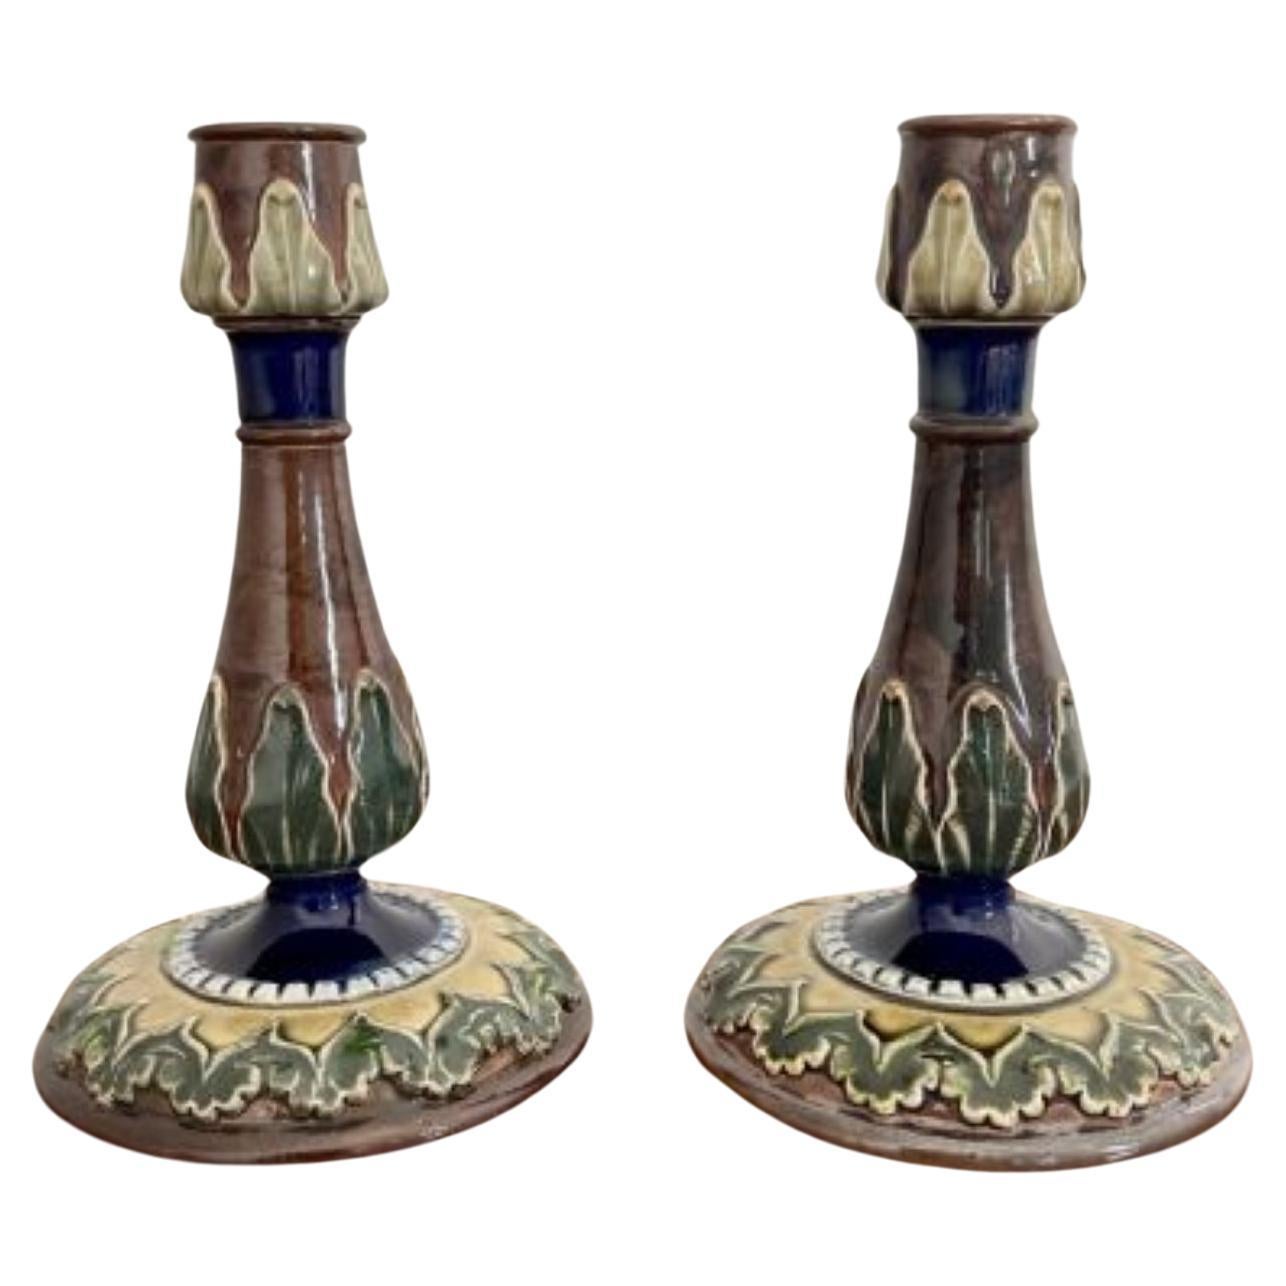 Attractive pair of antique Royal Doulton candlesticks  For Sale